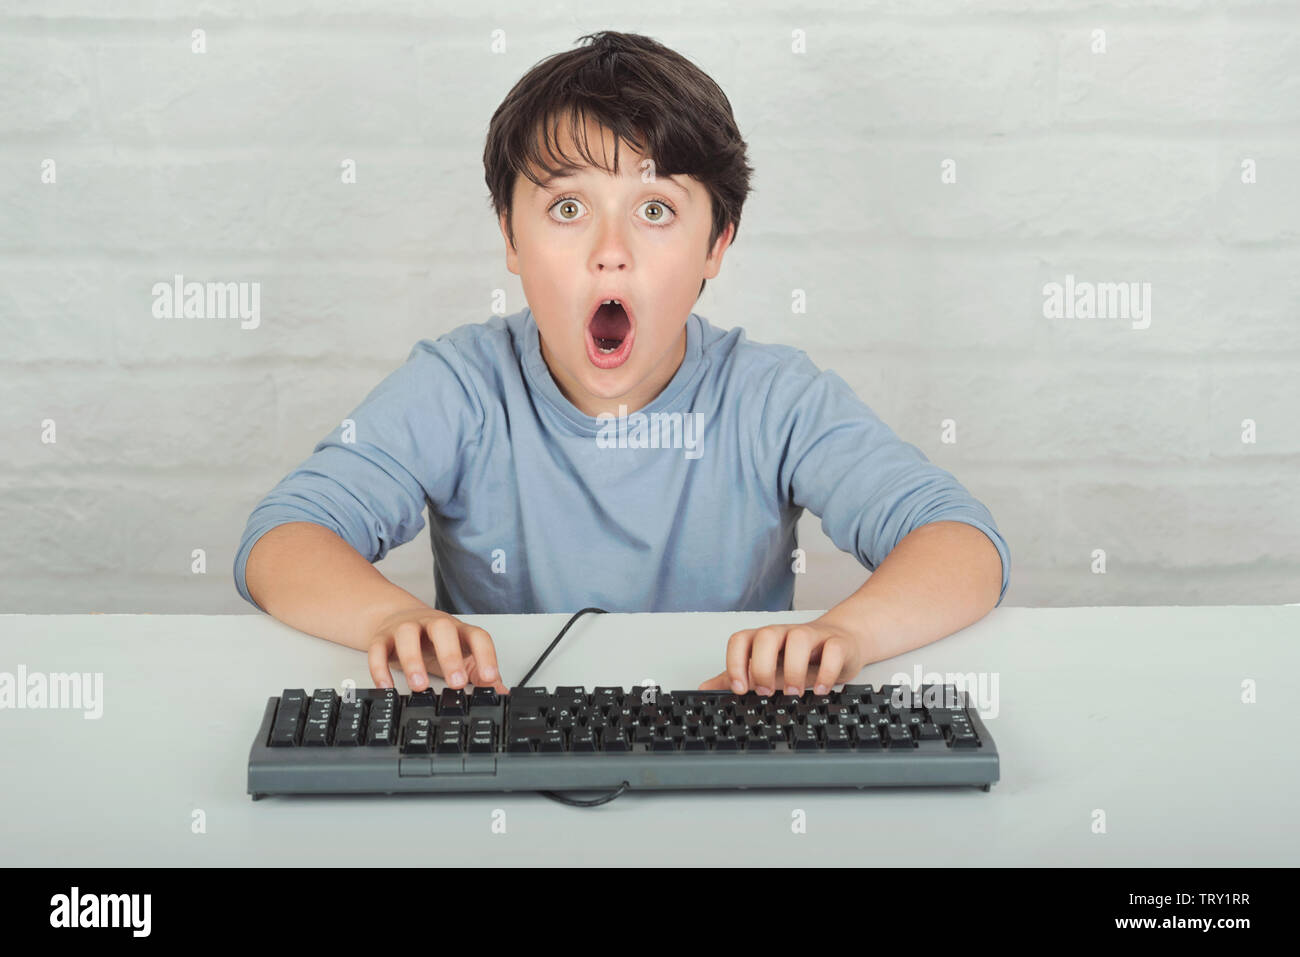 surprised child with keyboard on brick background Stock Photo